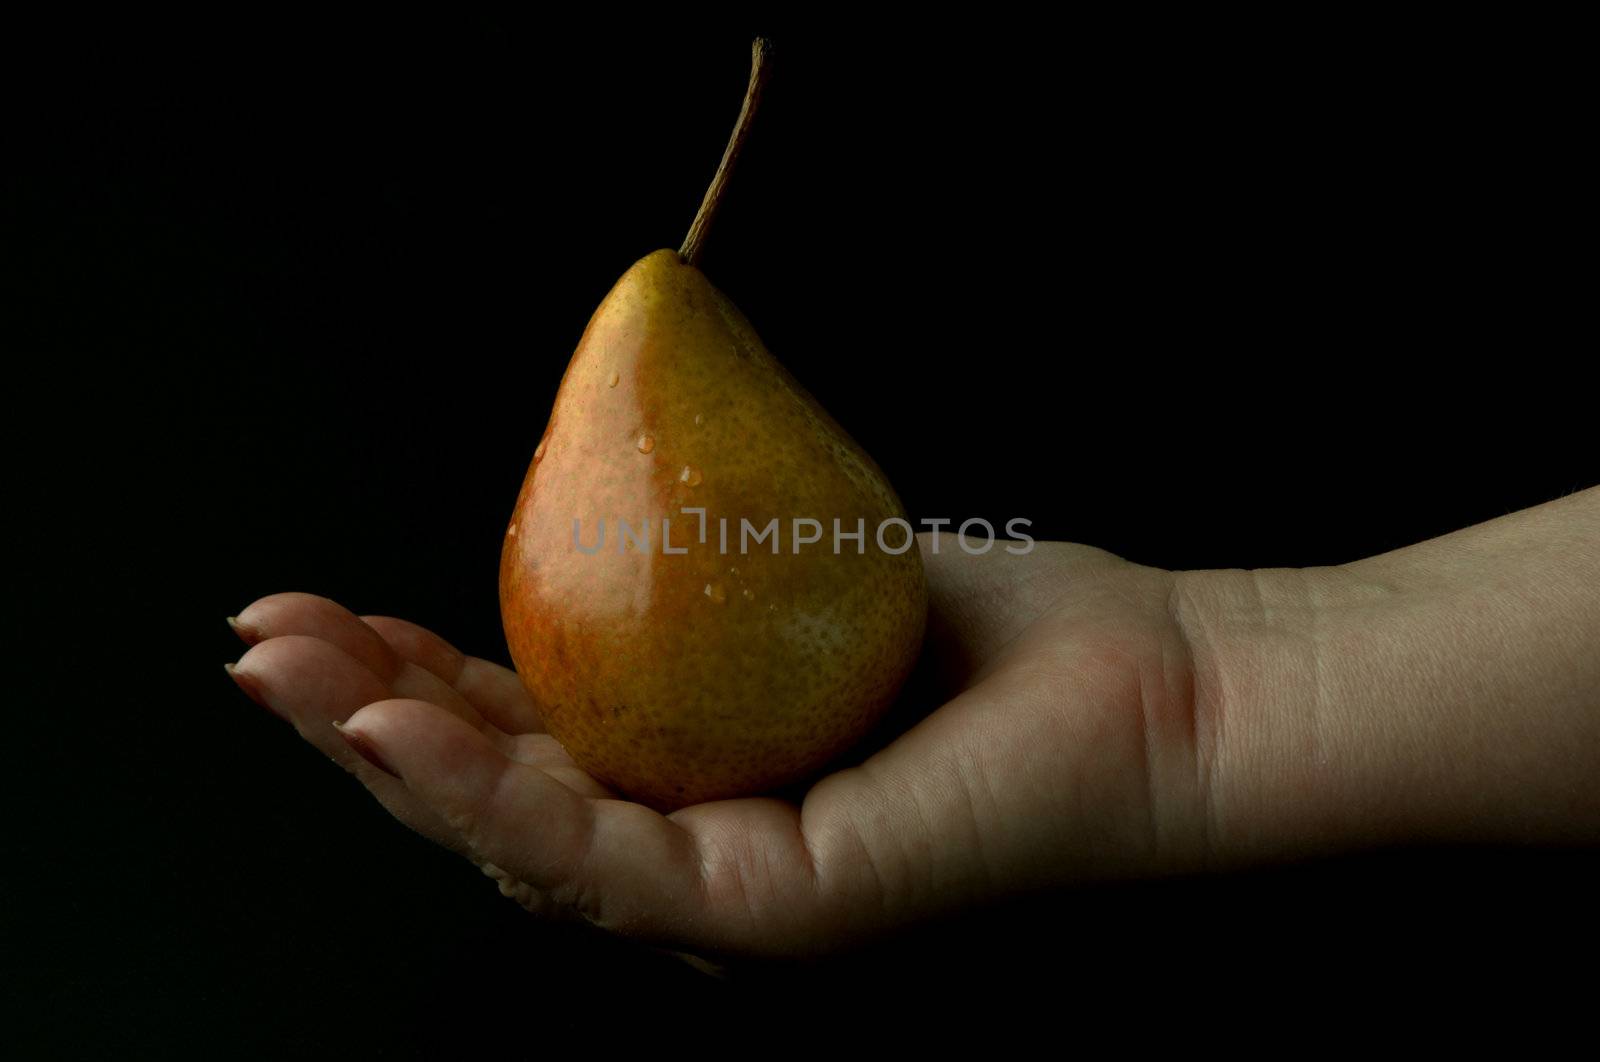 wet pear on the hand